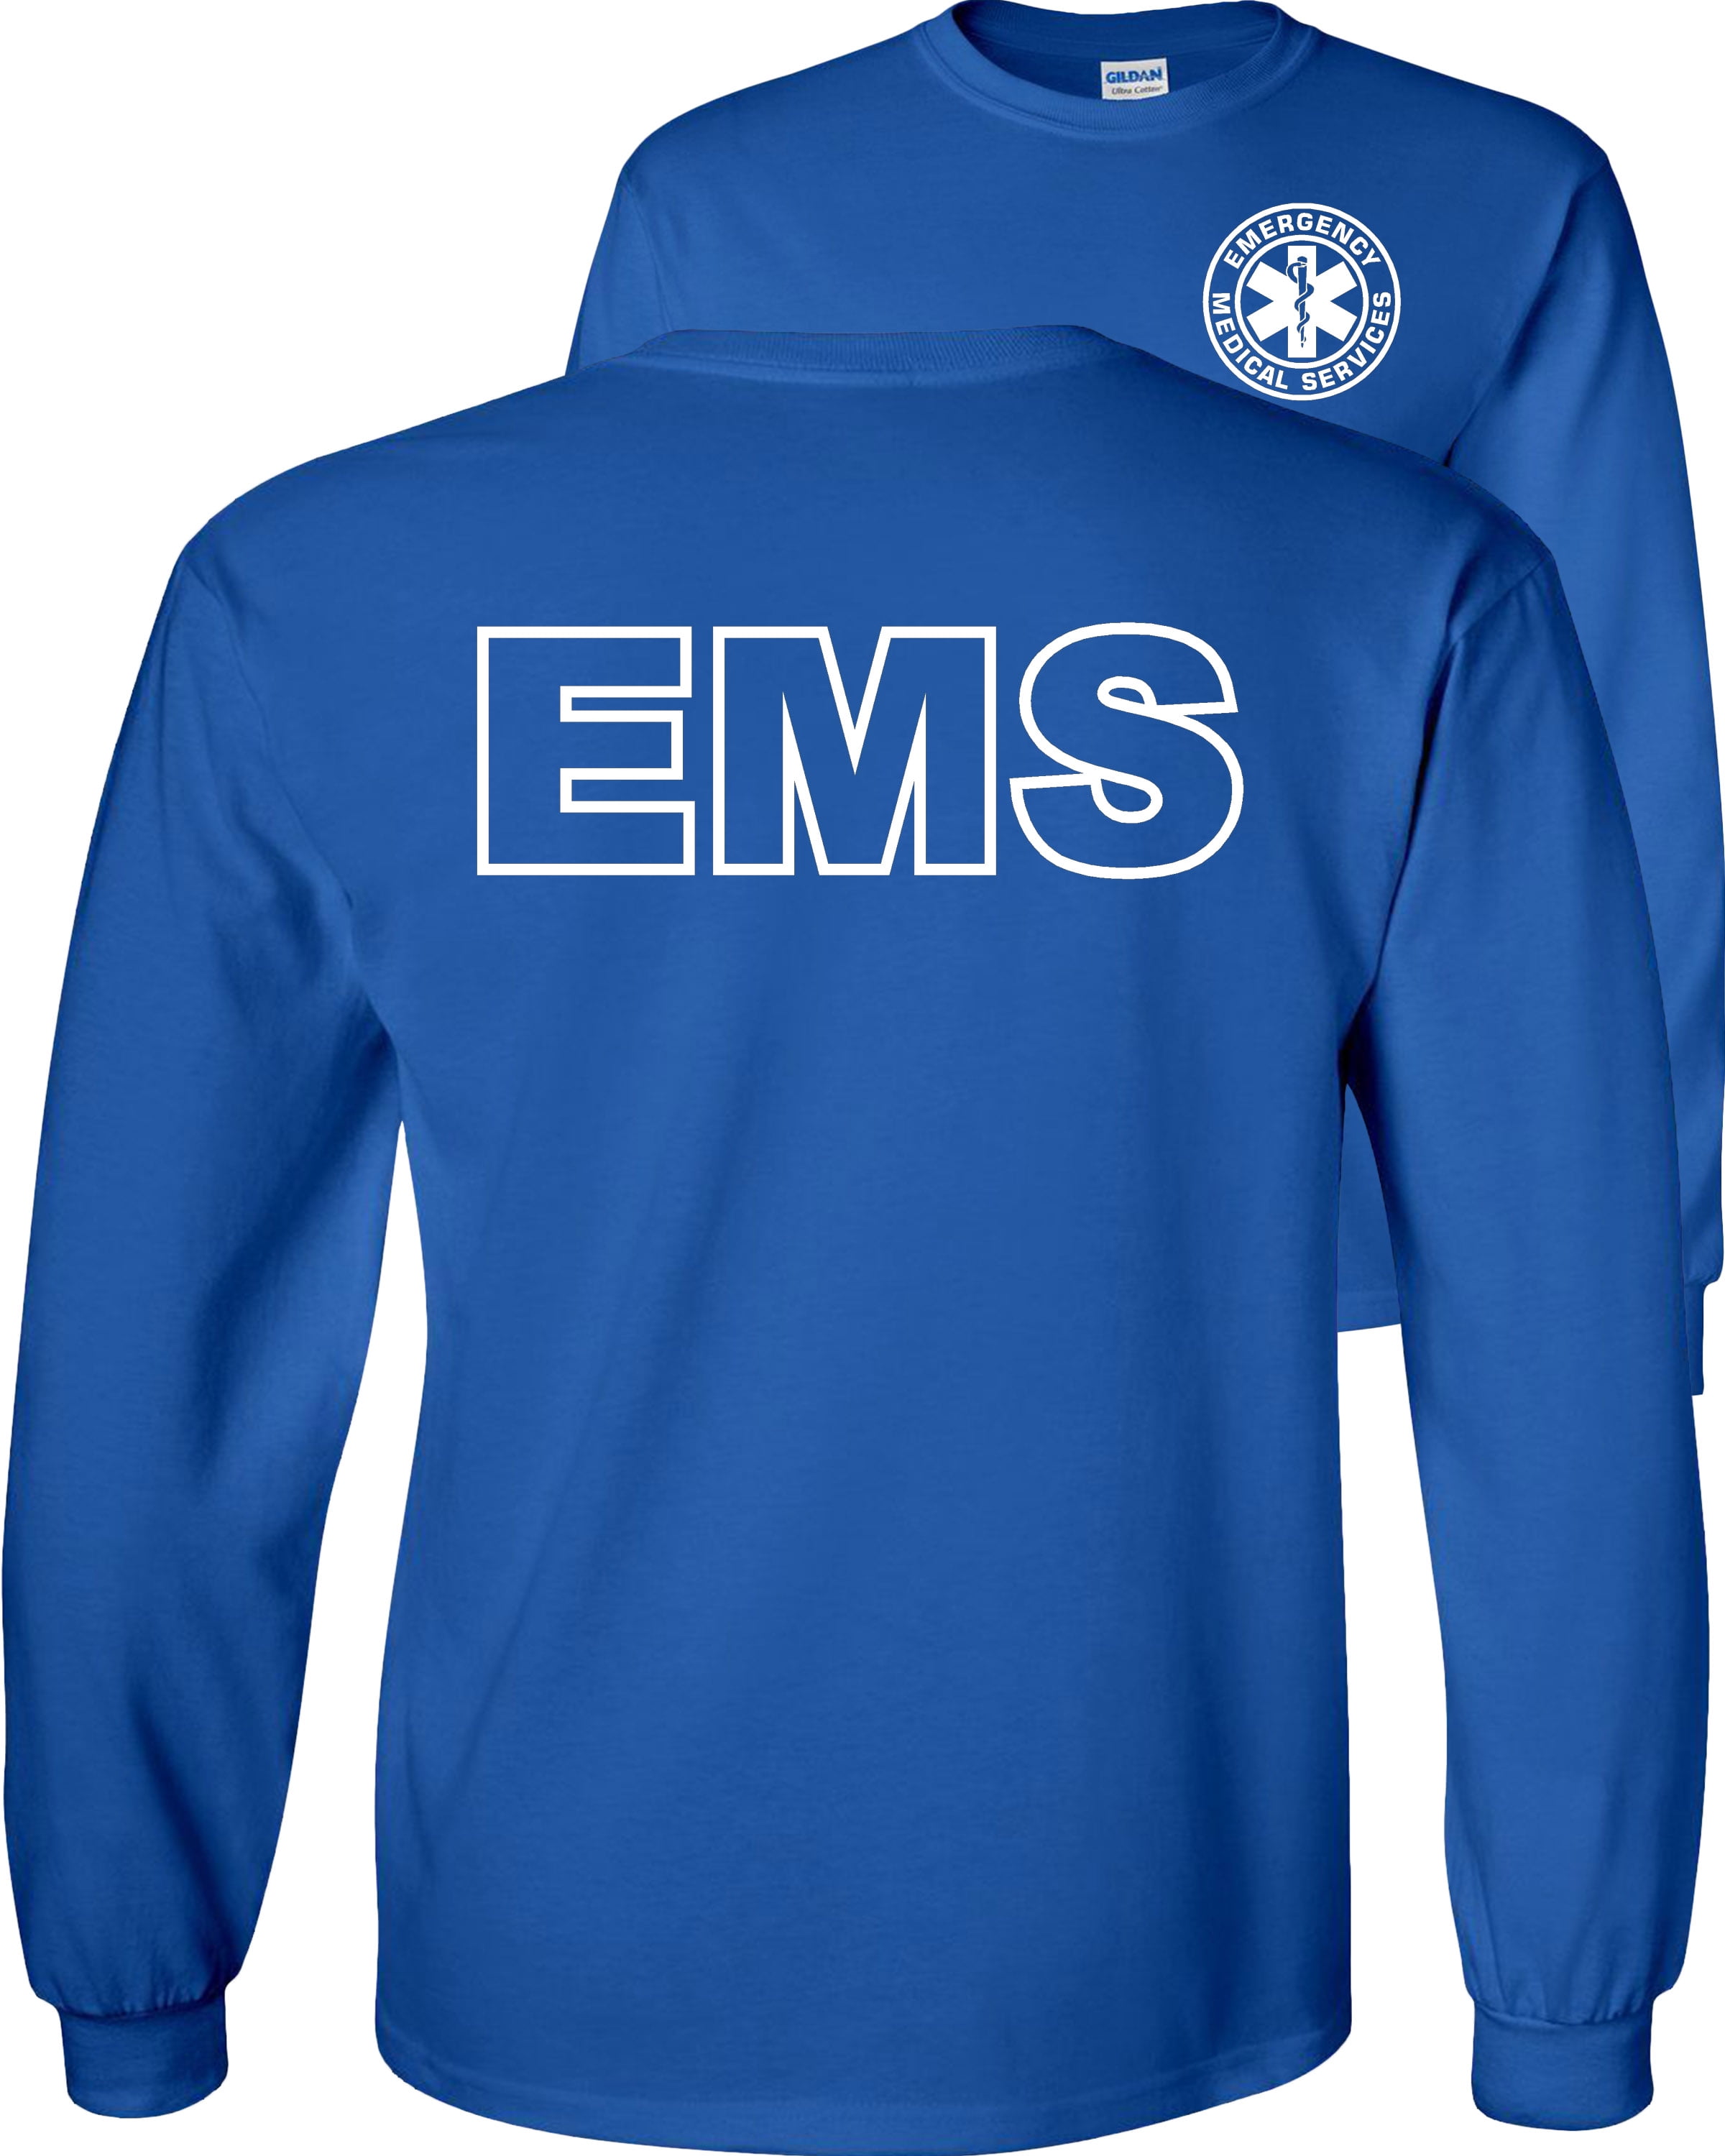 Buy > ems t shirts > in stock